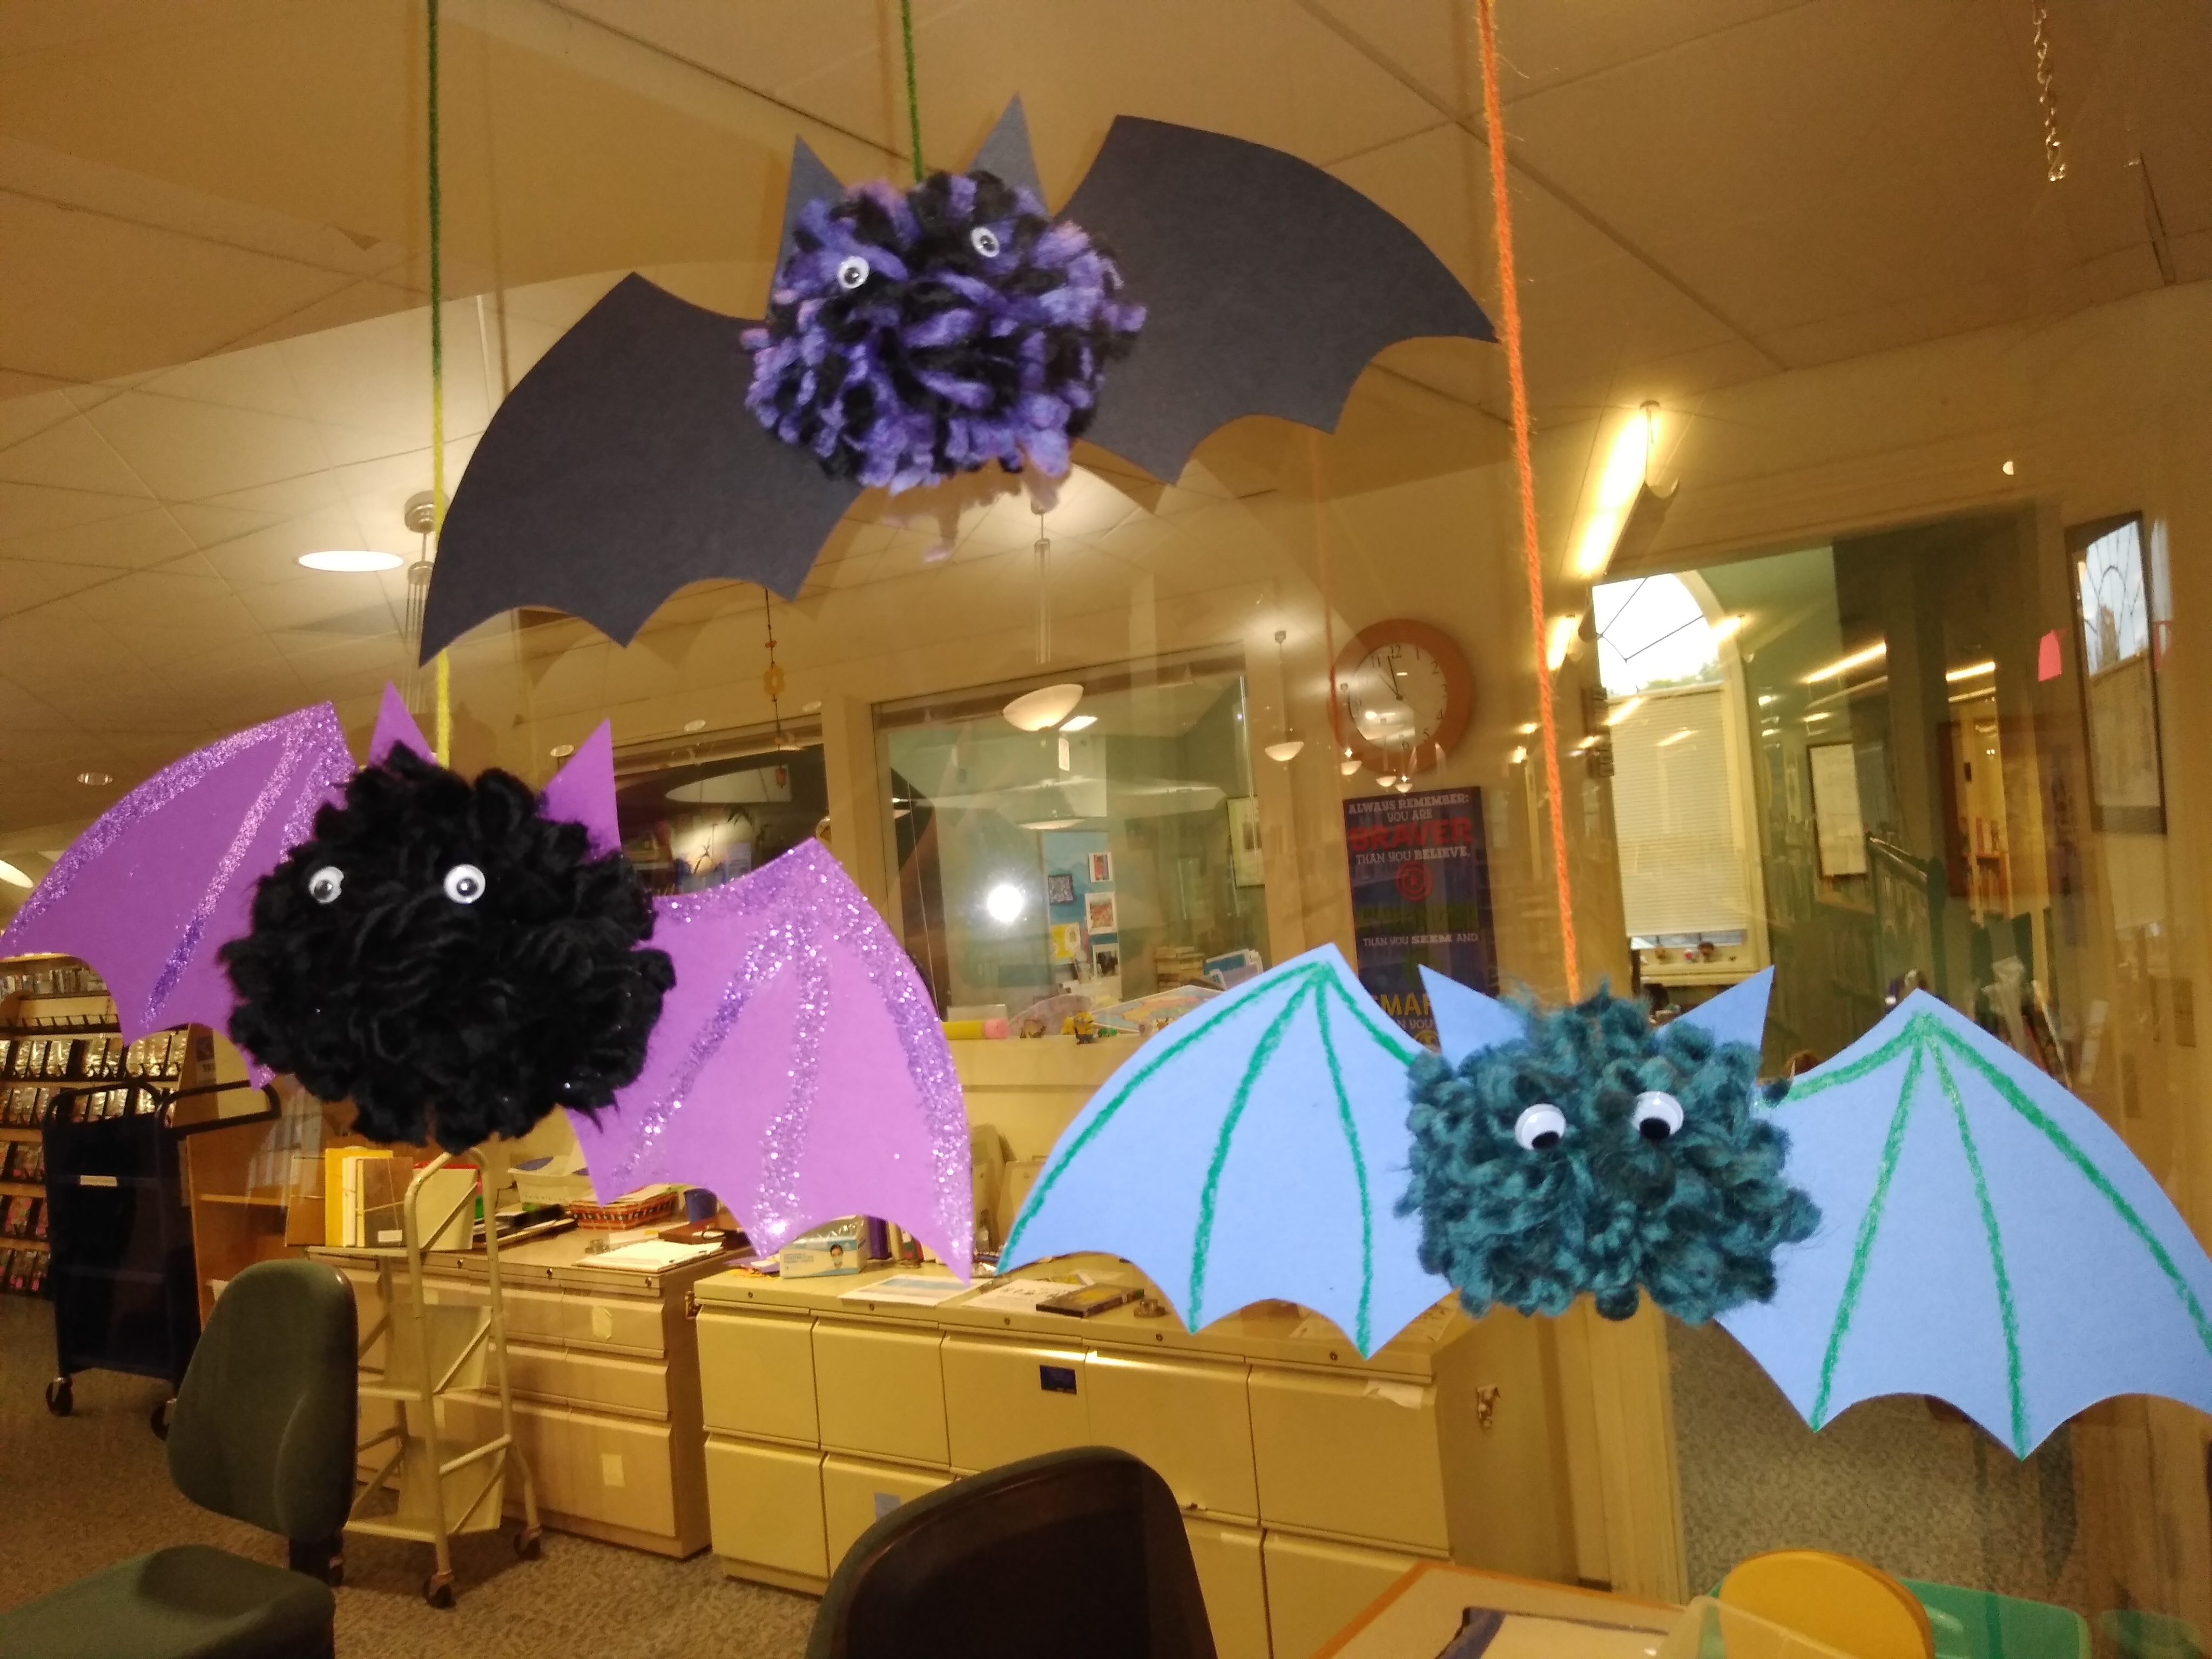 Image of three bat made from yarn and paperhanging in the library.